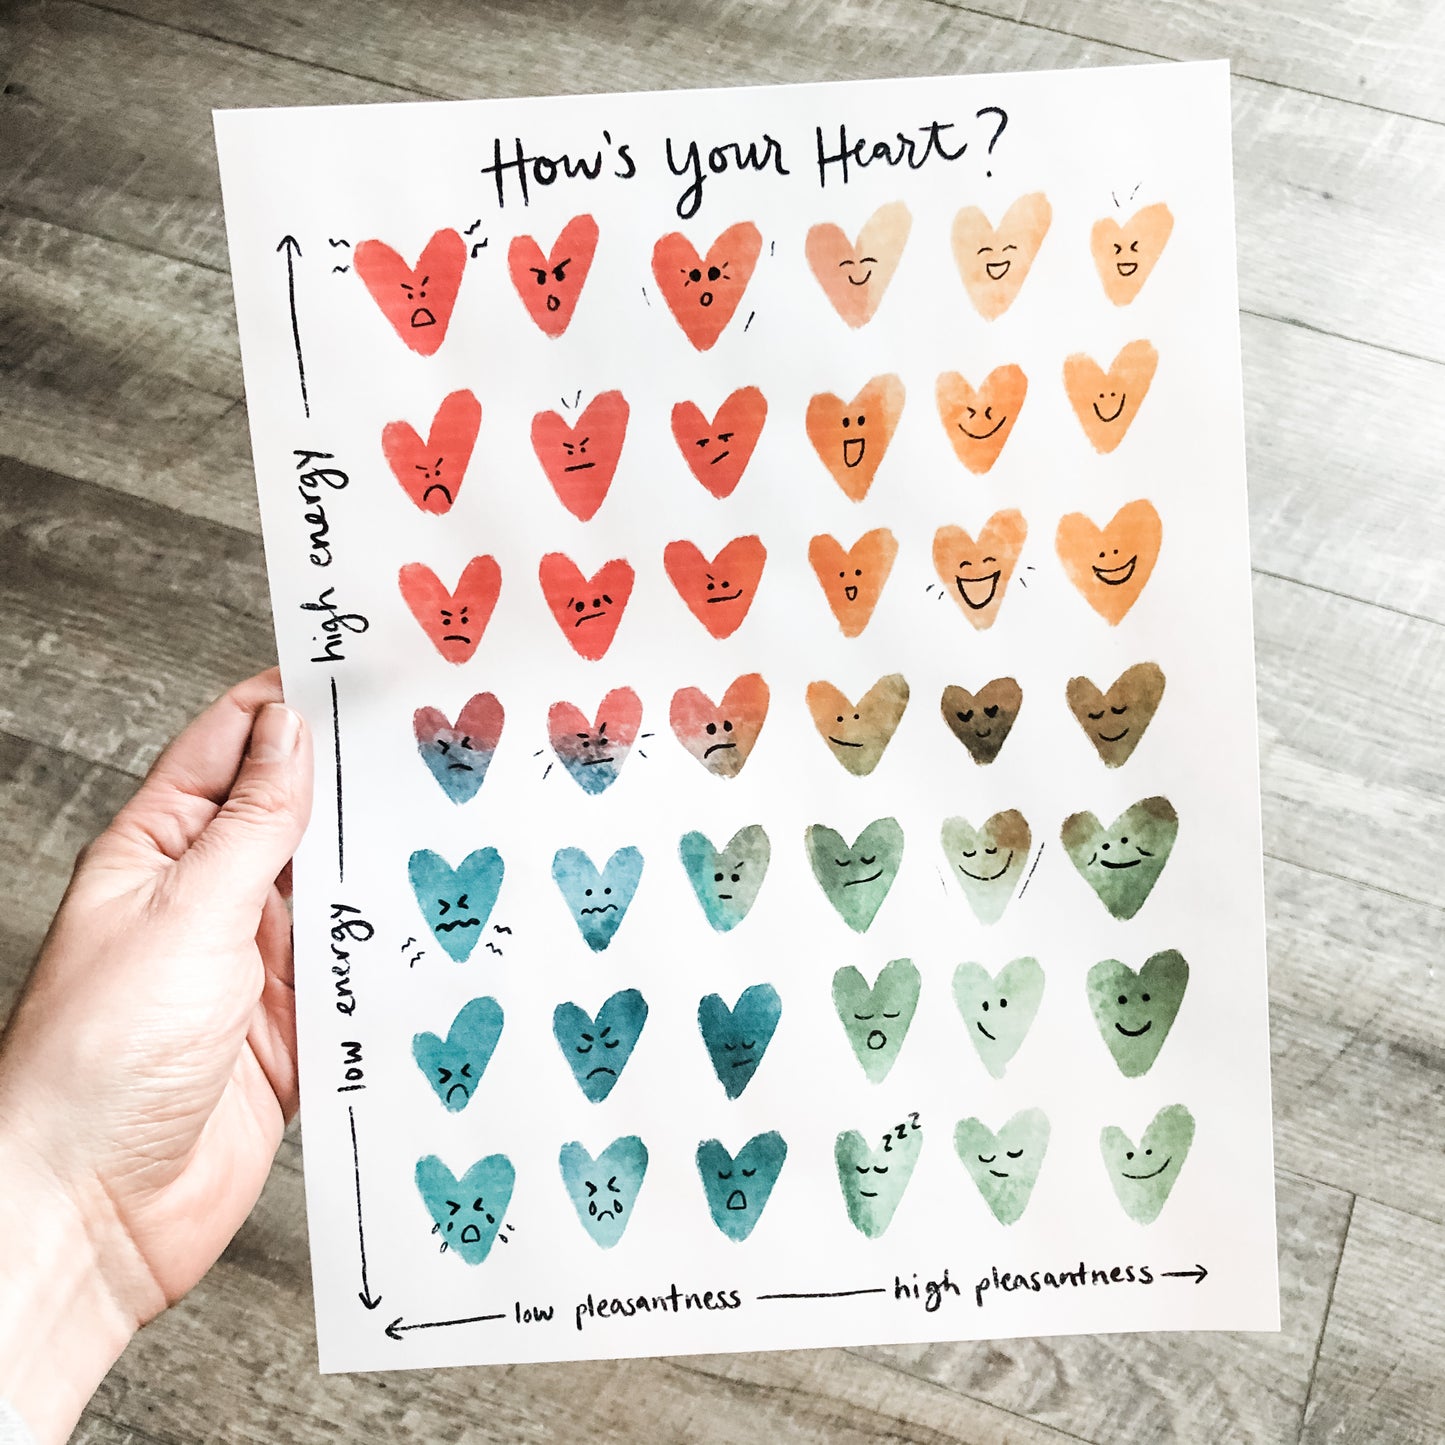 How's Your Heart? Mood Meter Printable Download